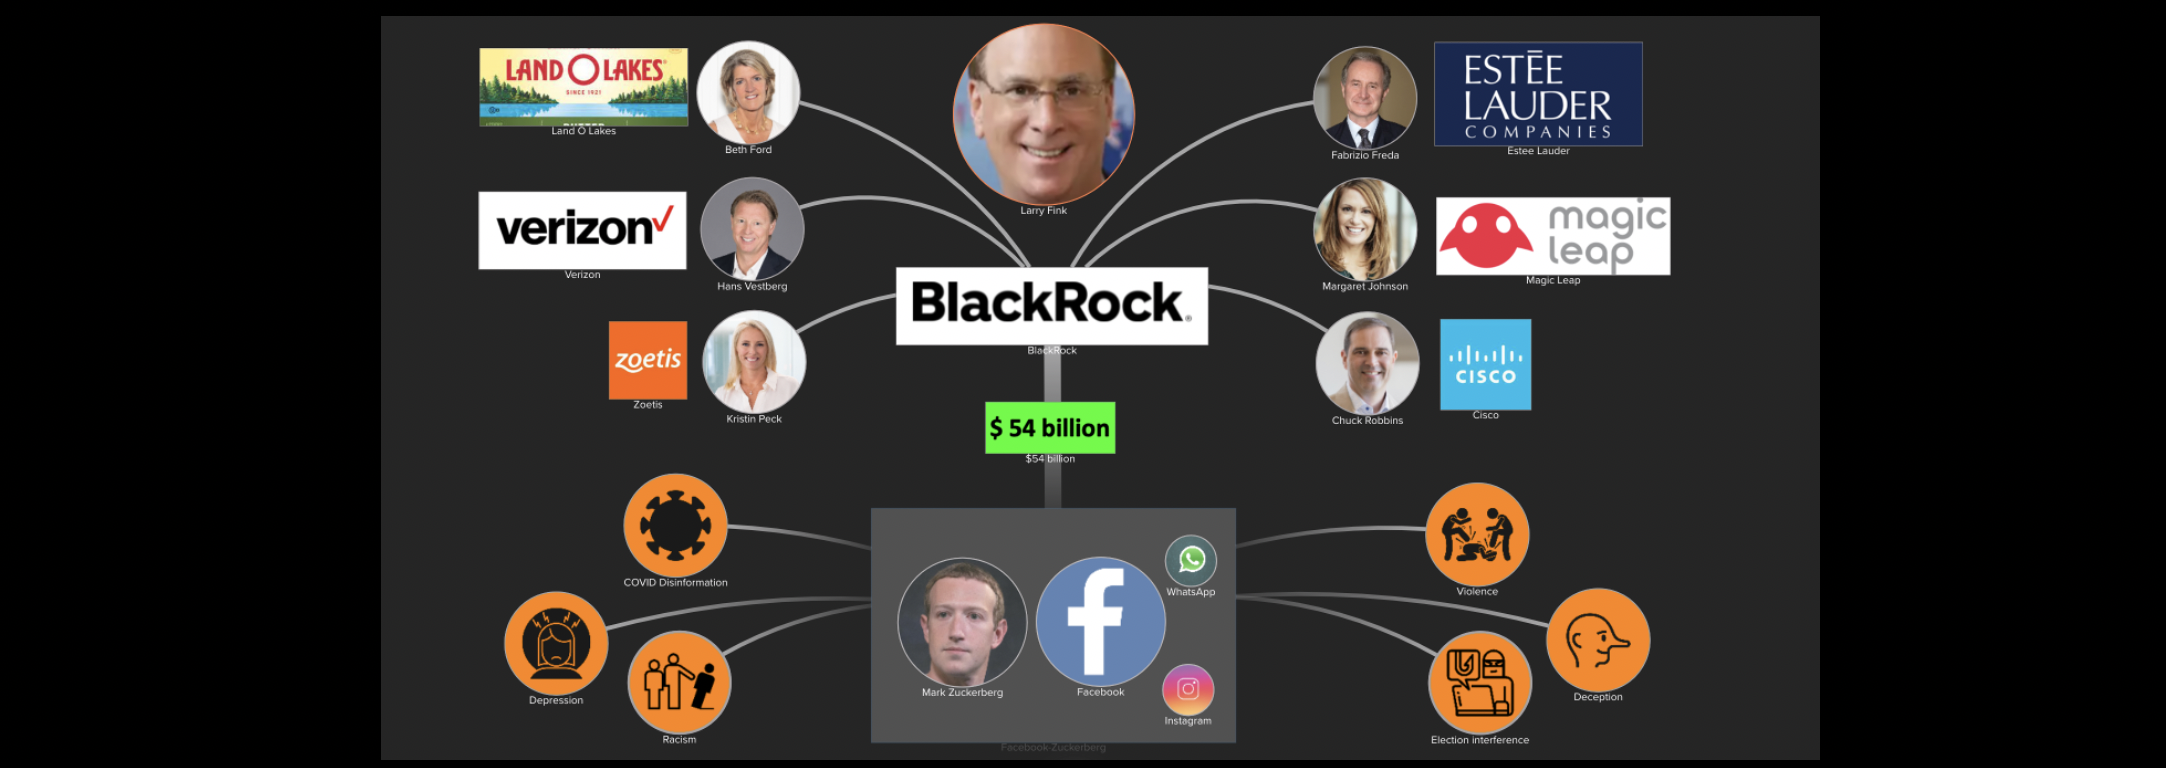 BlackRock invests $54 billion in Facebook whose actions are a danger to society and democracy. 